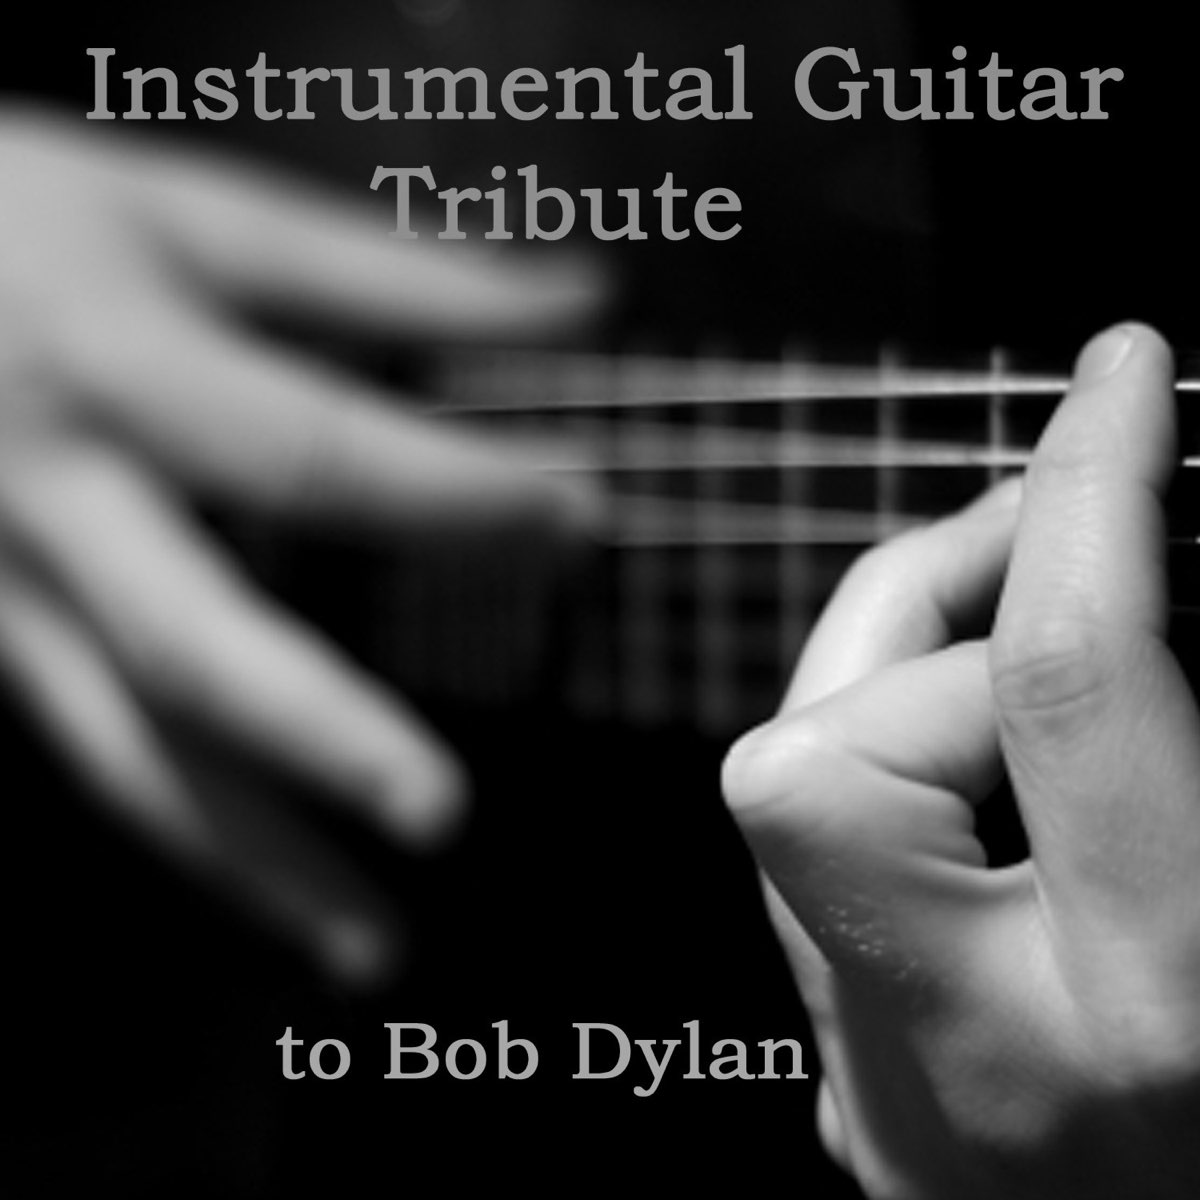 Instrumental Guitar Tribute to Bob Dylan by The O'Neill Brothers Group on  Apple Music